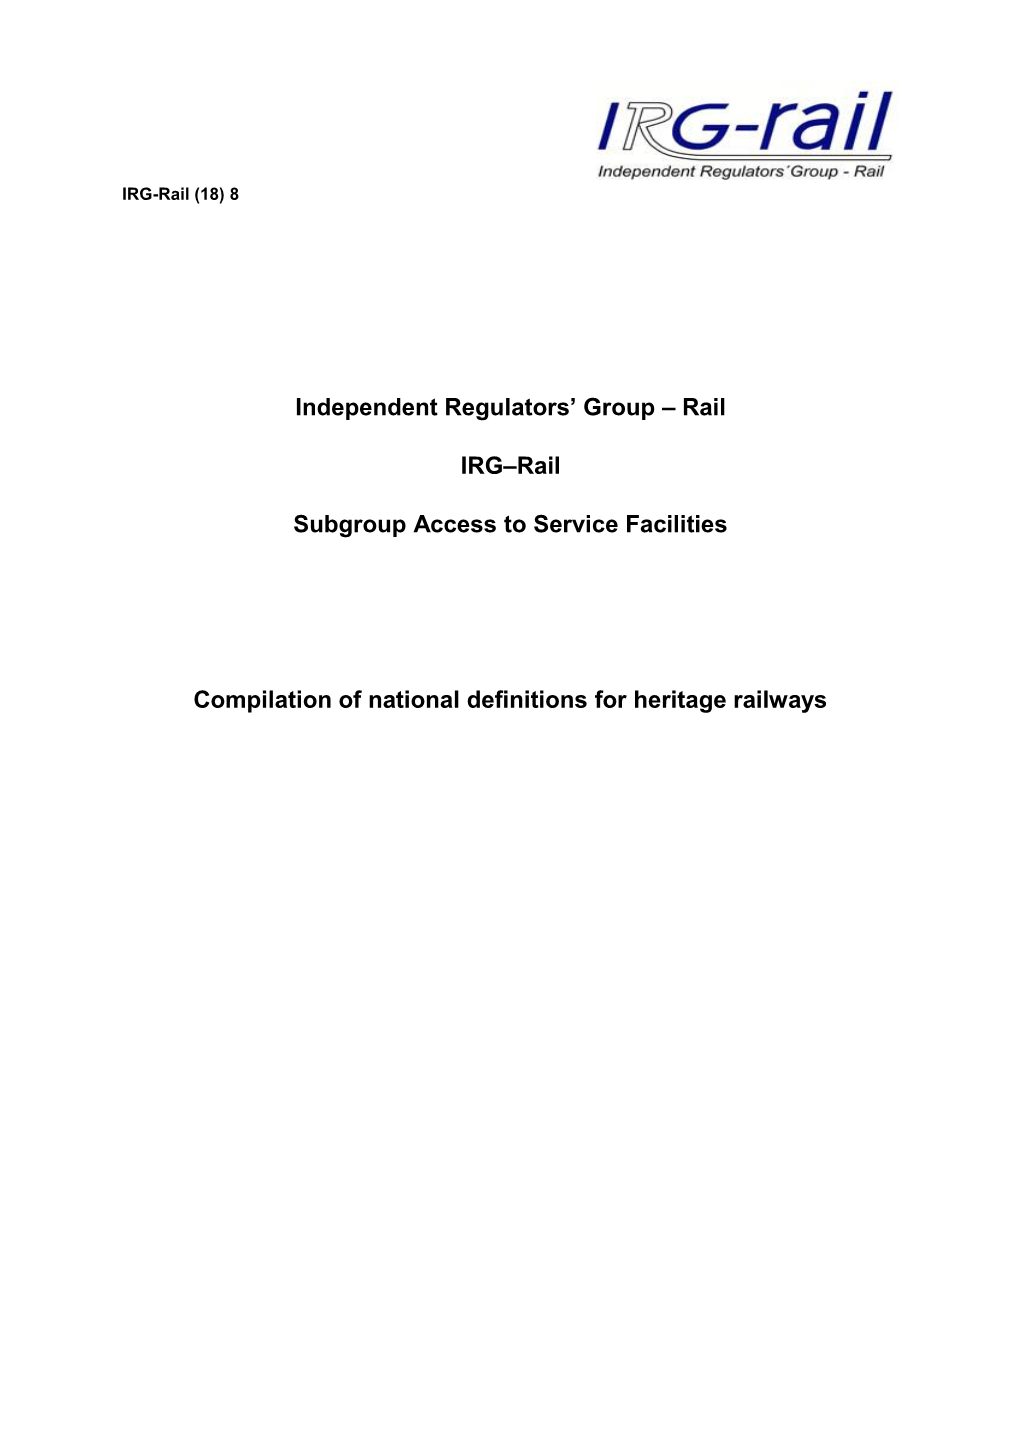 8 Compilation of National Definitions for Heritage Railways